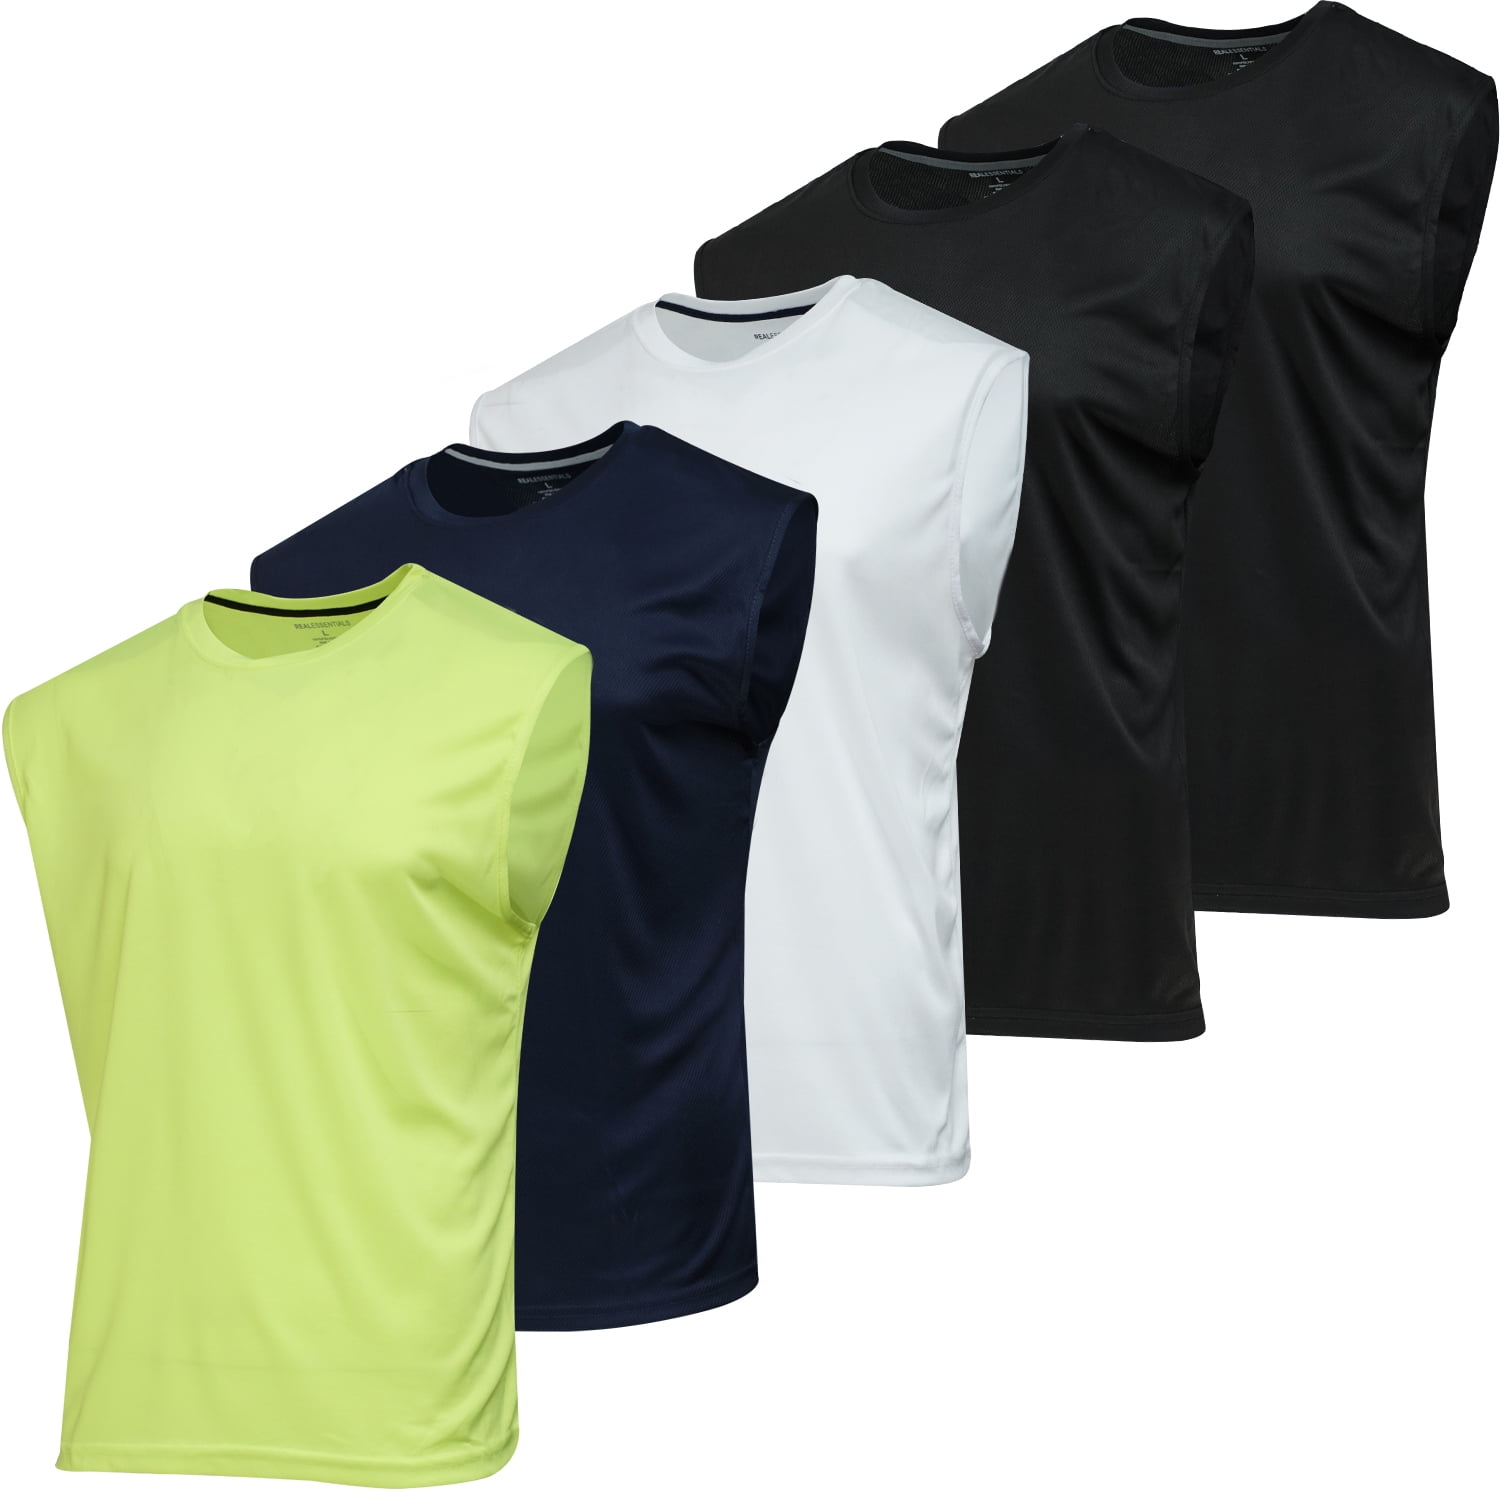 5 Pack: Men's Mesh Active Athletic Tech Tank Top - Workout & Training ...